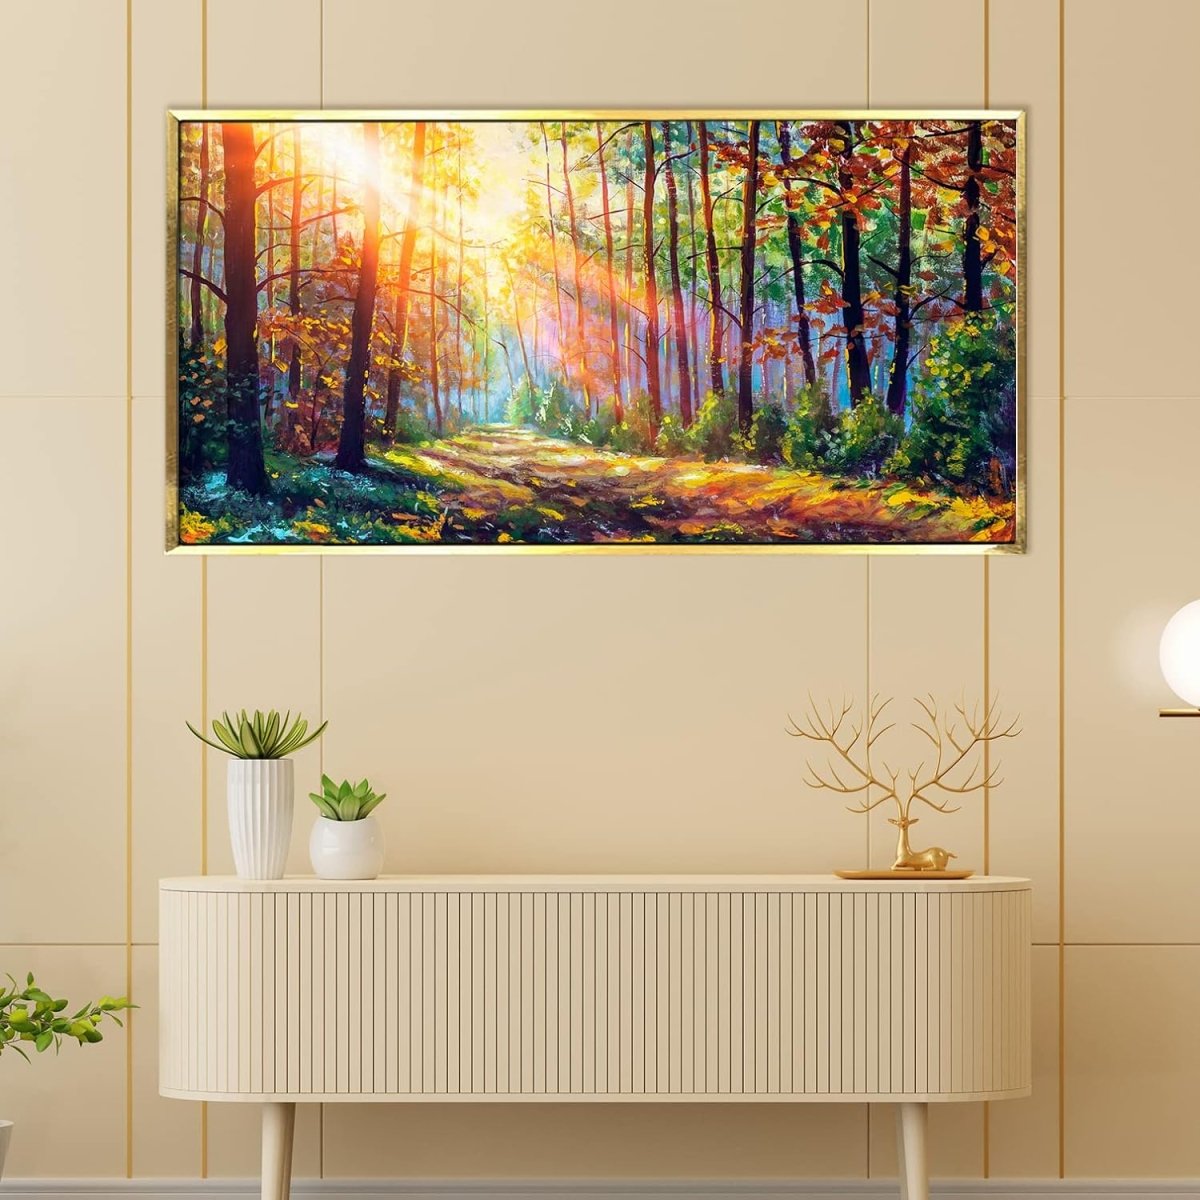 Metalkart Special Sunlight Through the Trees Canvas Wall design (36 x 18 Inches)